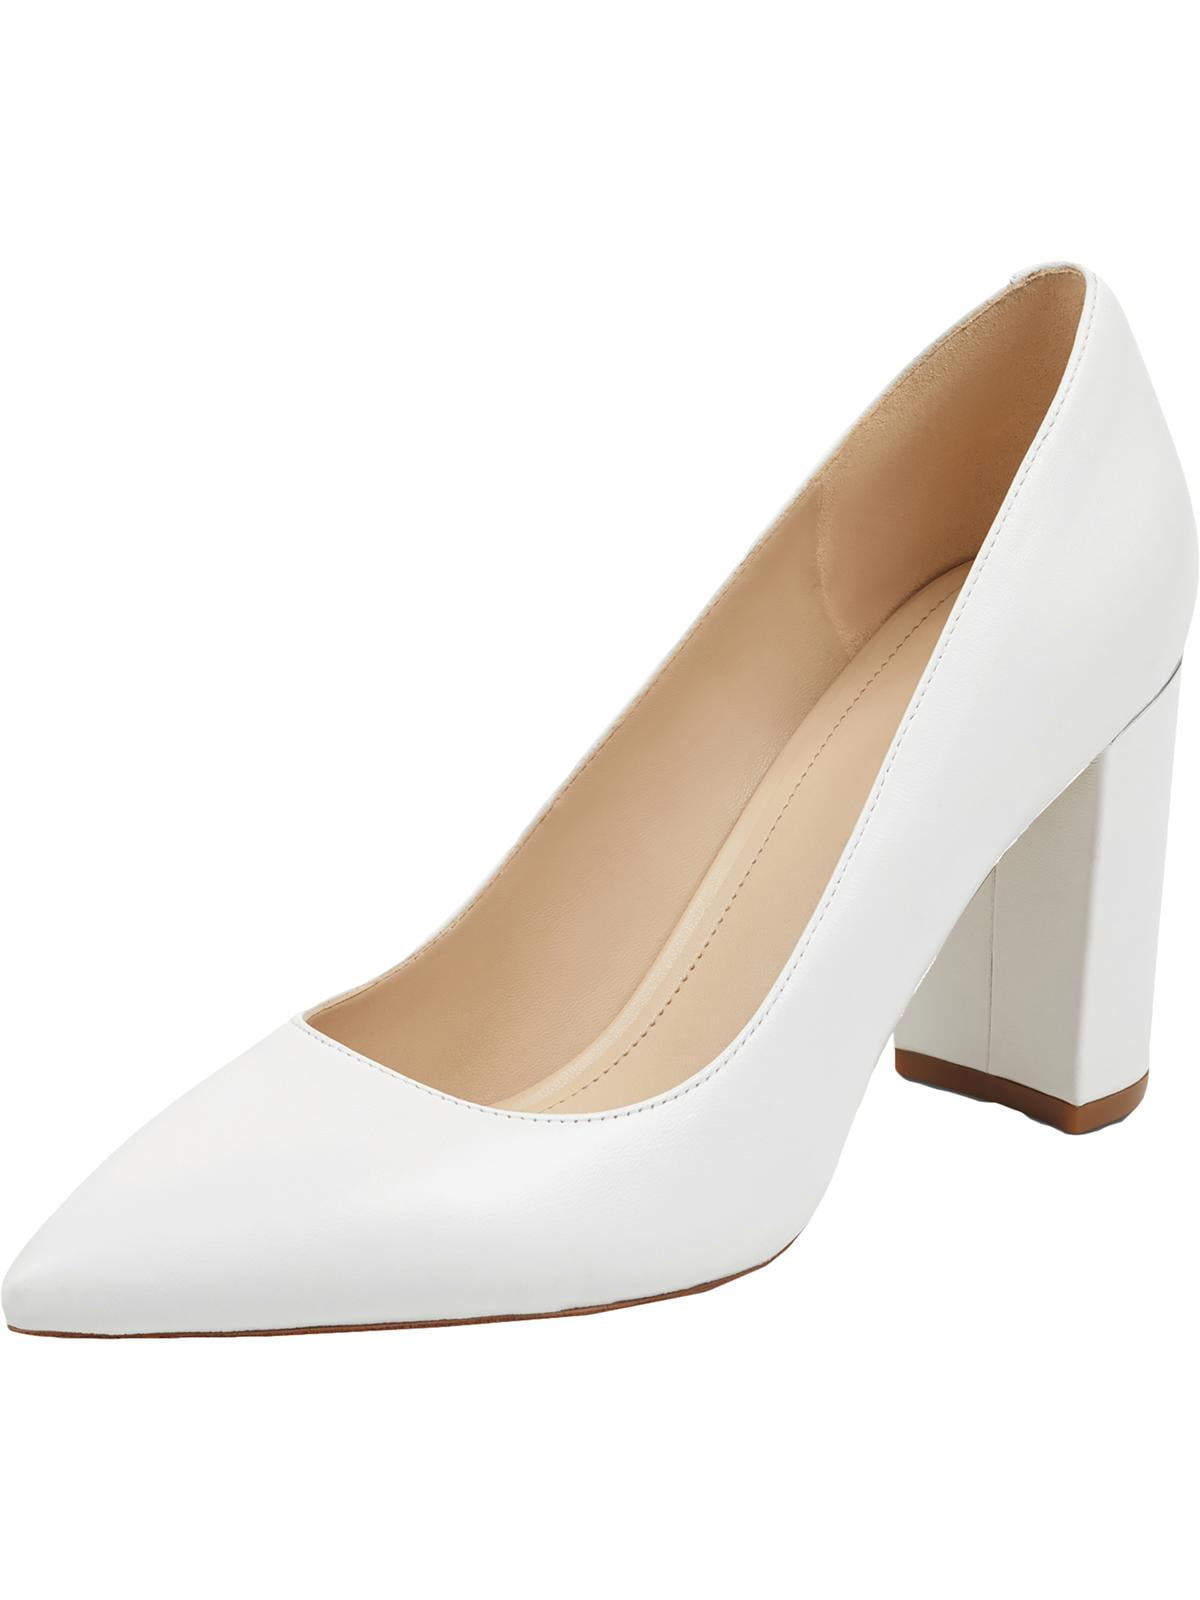 Marc Fisher Womens Viviene Leather Pointed Toe Pumps White 6.5 Medium ...